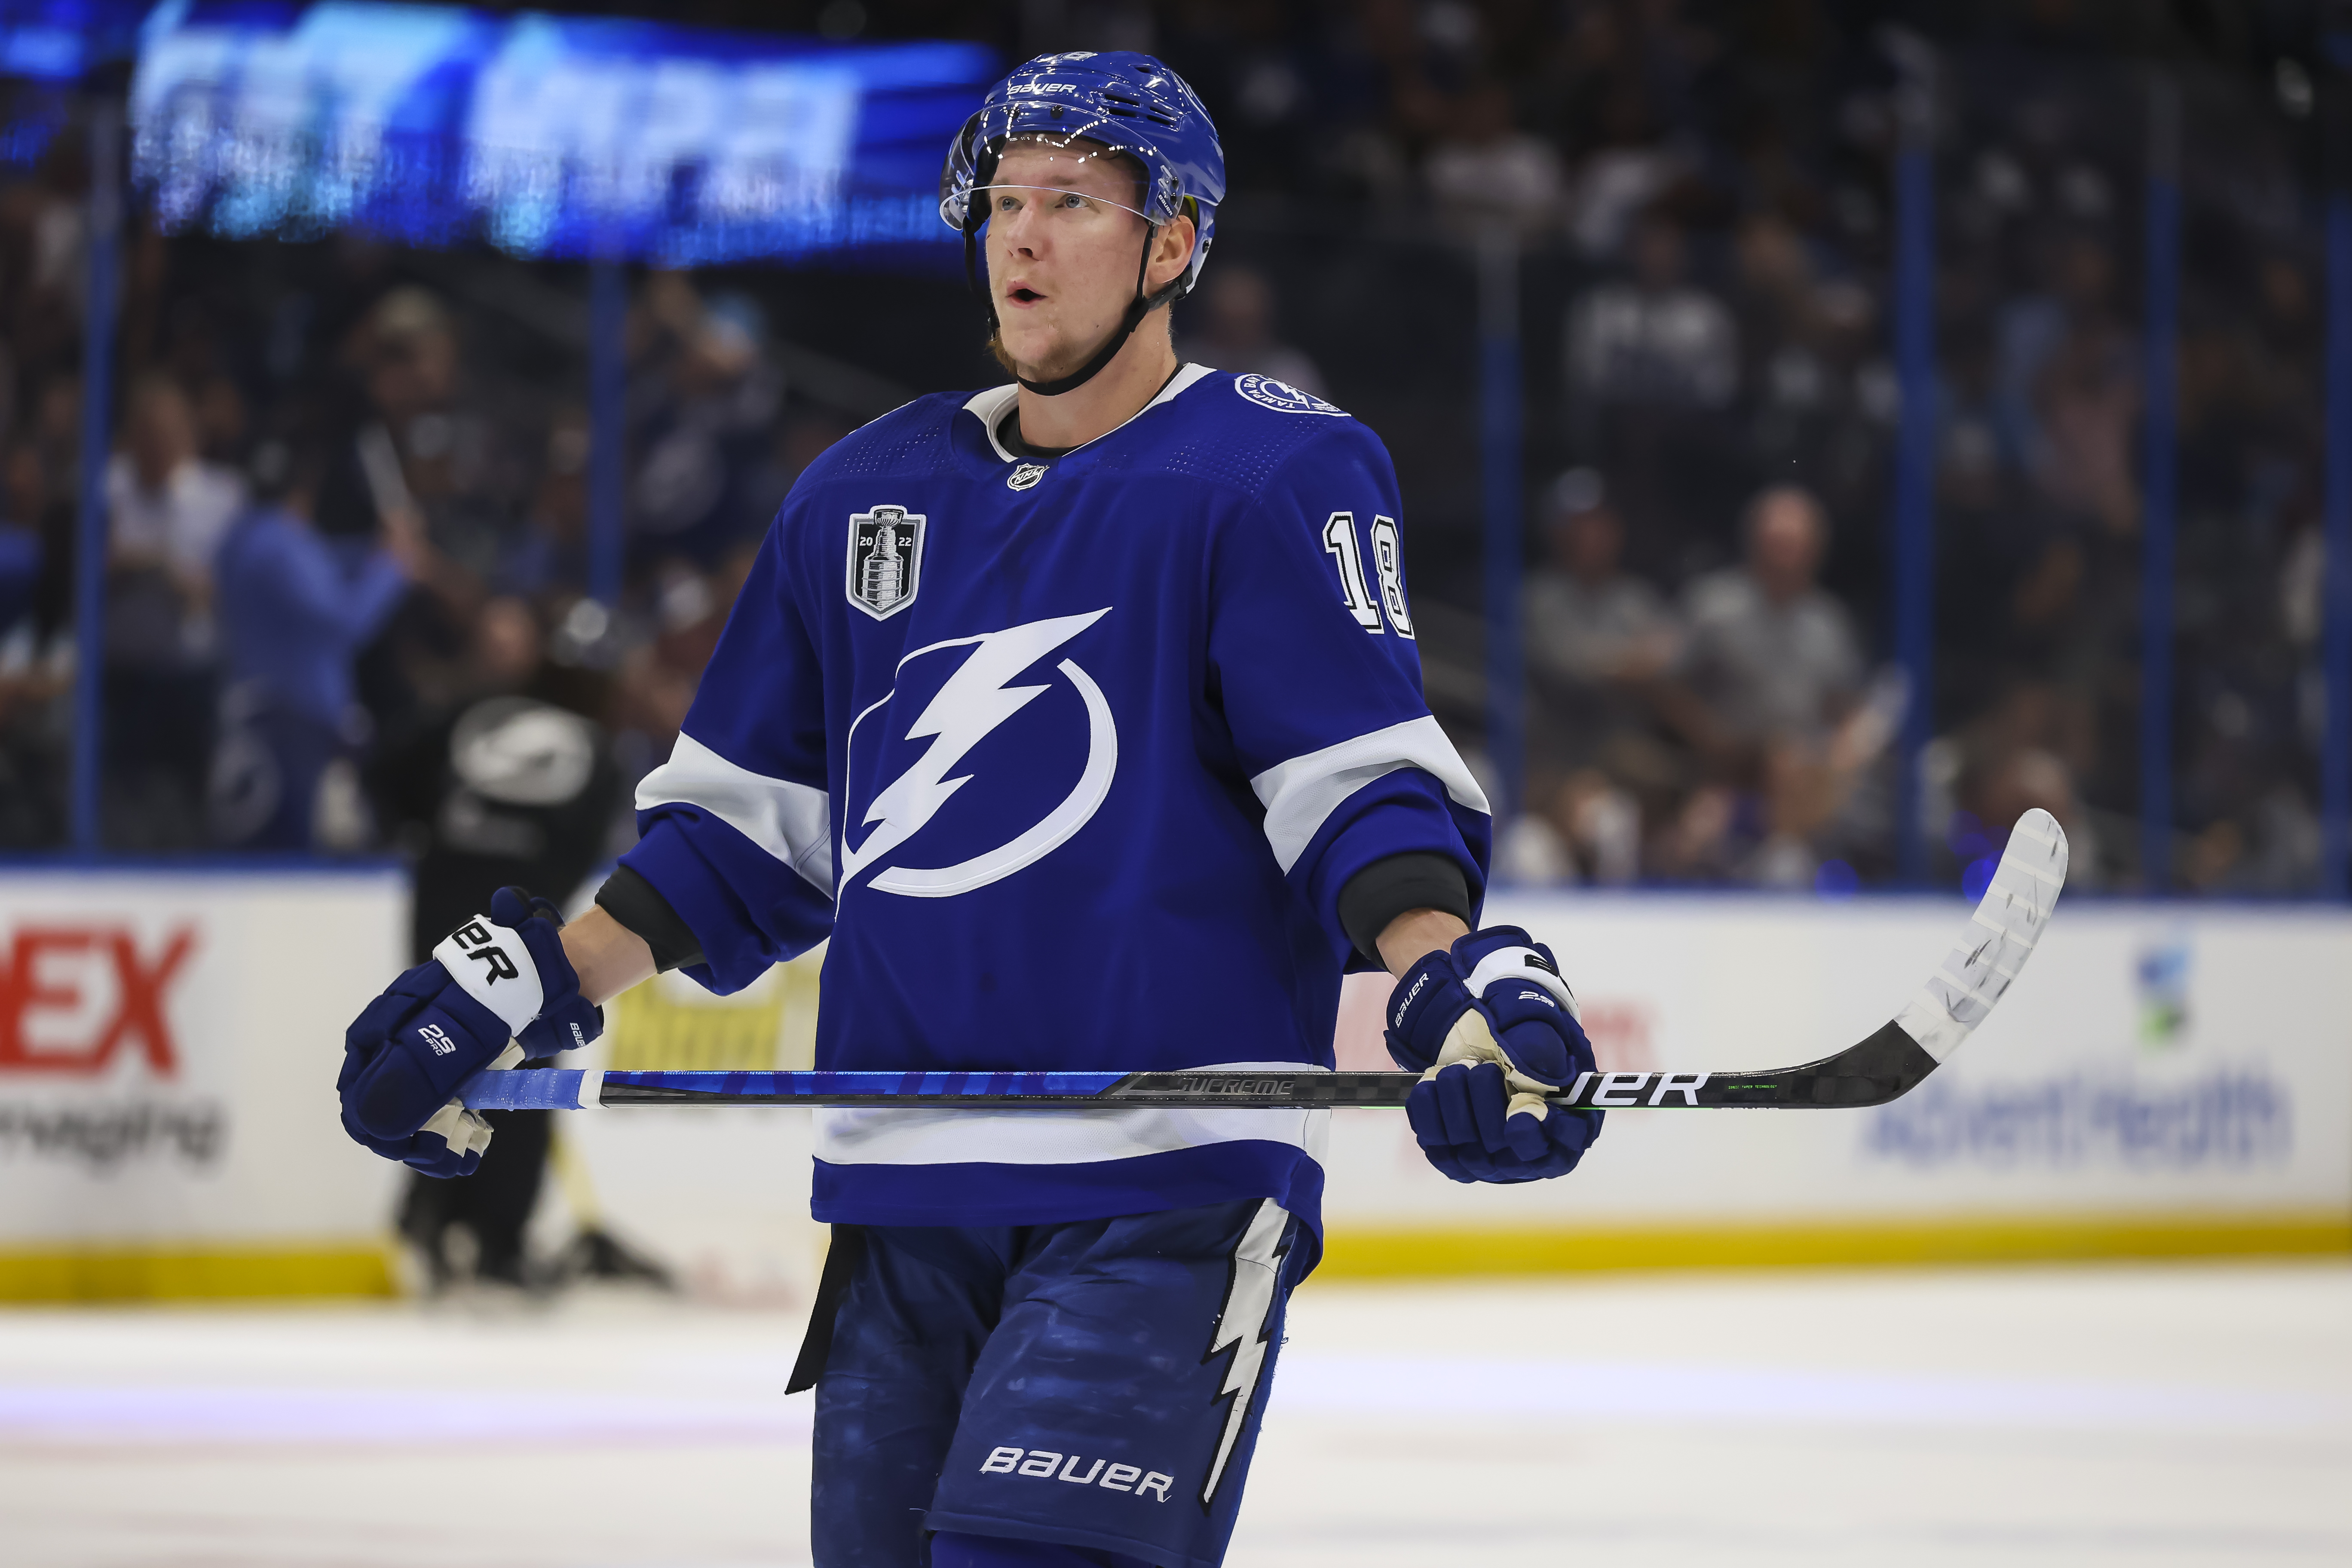 Ondrej Palat #18 of the Tampa Bay Lightning skates against the Colorado Avalanche during first period in Game Six of the 2022 Stanley Cup Final at Amalie Arena on June 26, 2022 in Tampa, Florida.